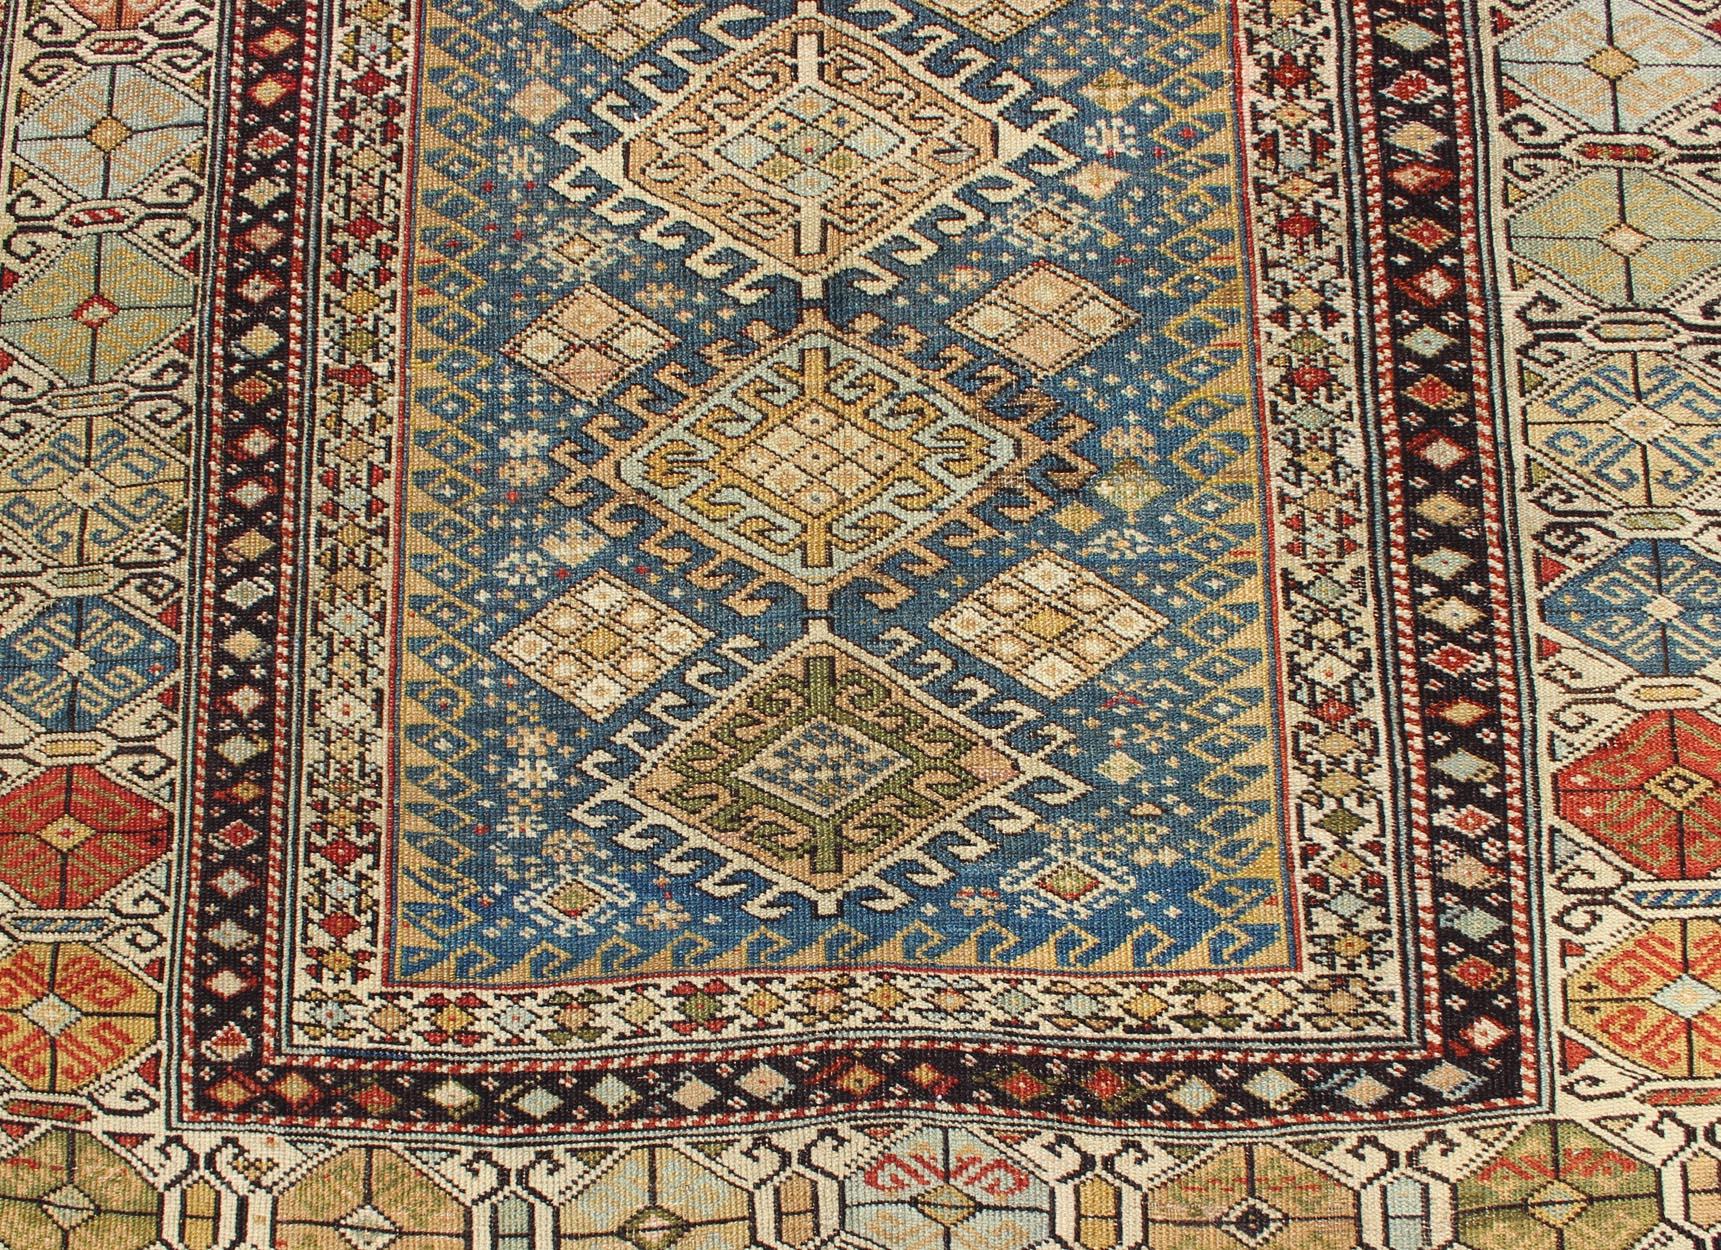 Tribal Antique Shirvan Rug in Teal Blue Background with Exquisitely Intricate Design For Sale